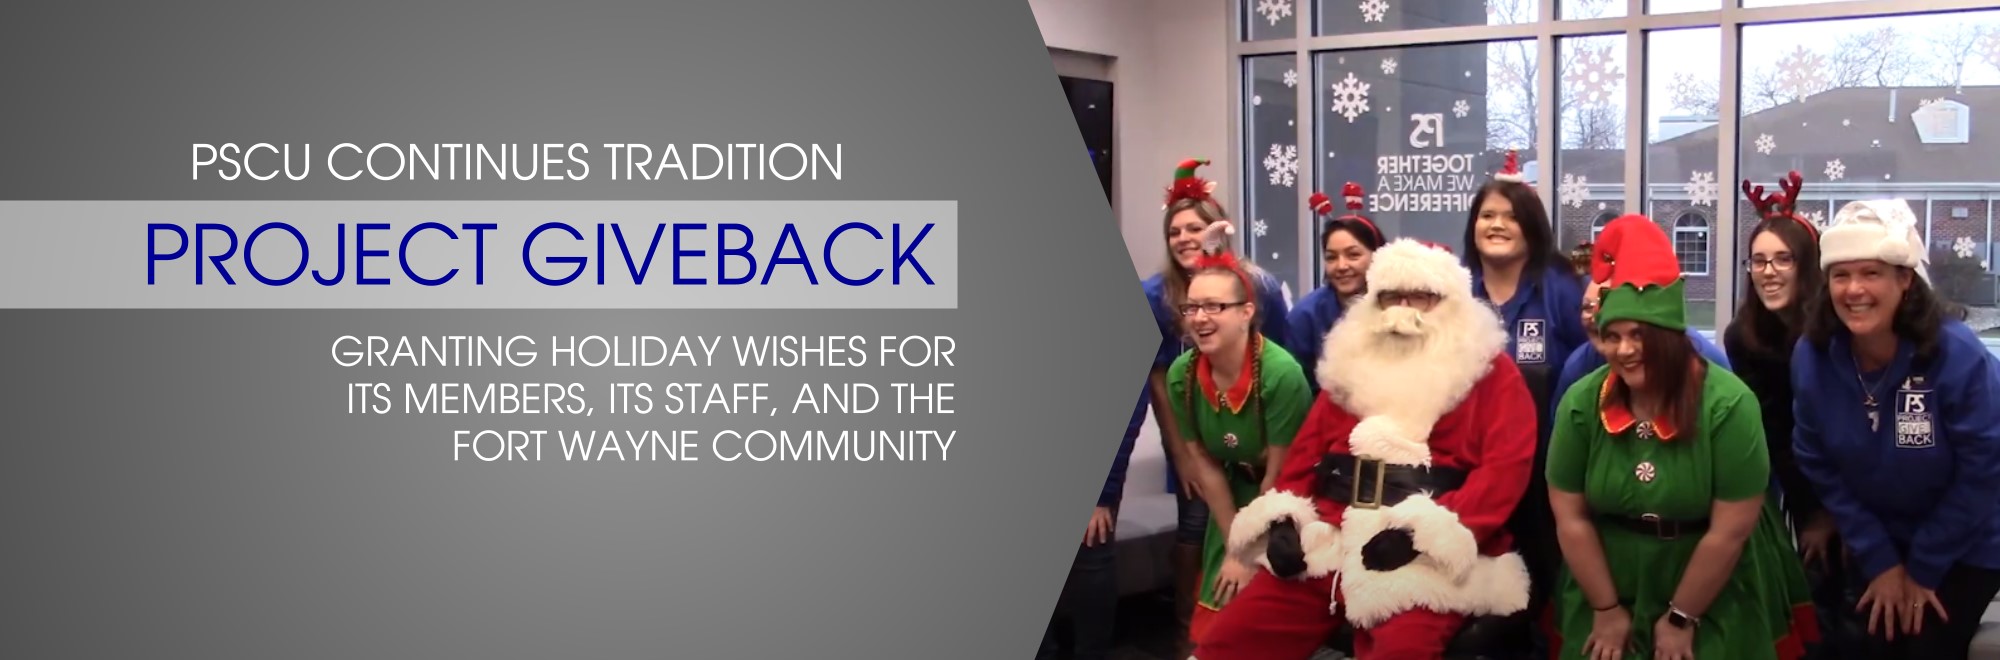 PSCU continues tradition Project Giveback granting wishes for its members, its staff and the fort wayne community.